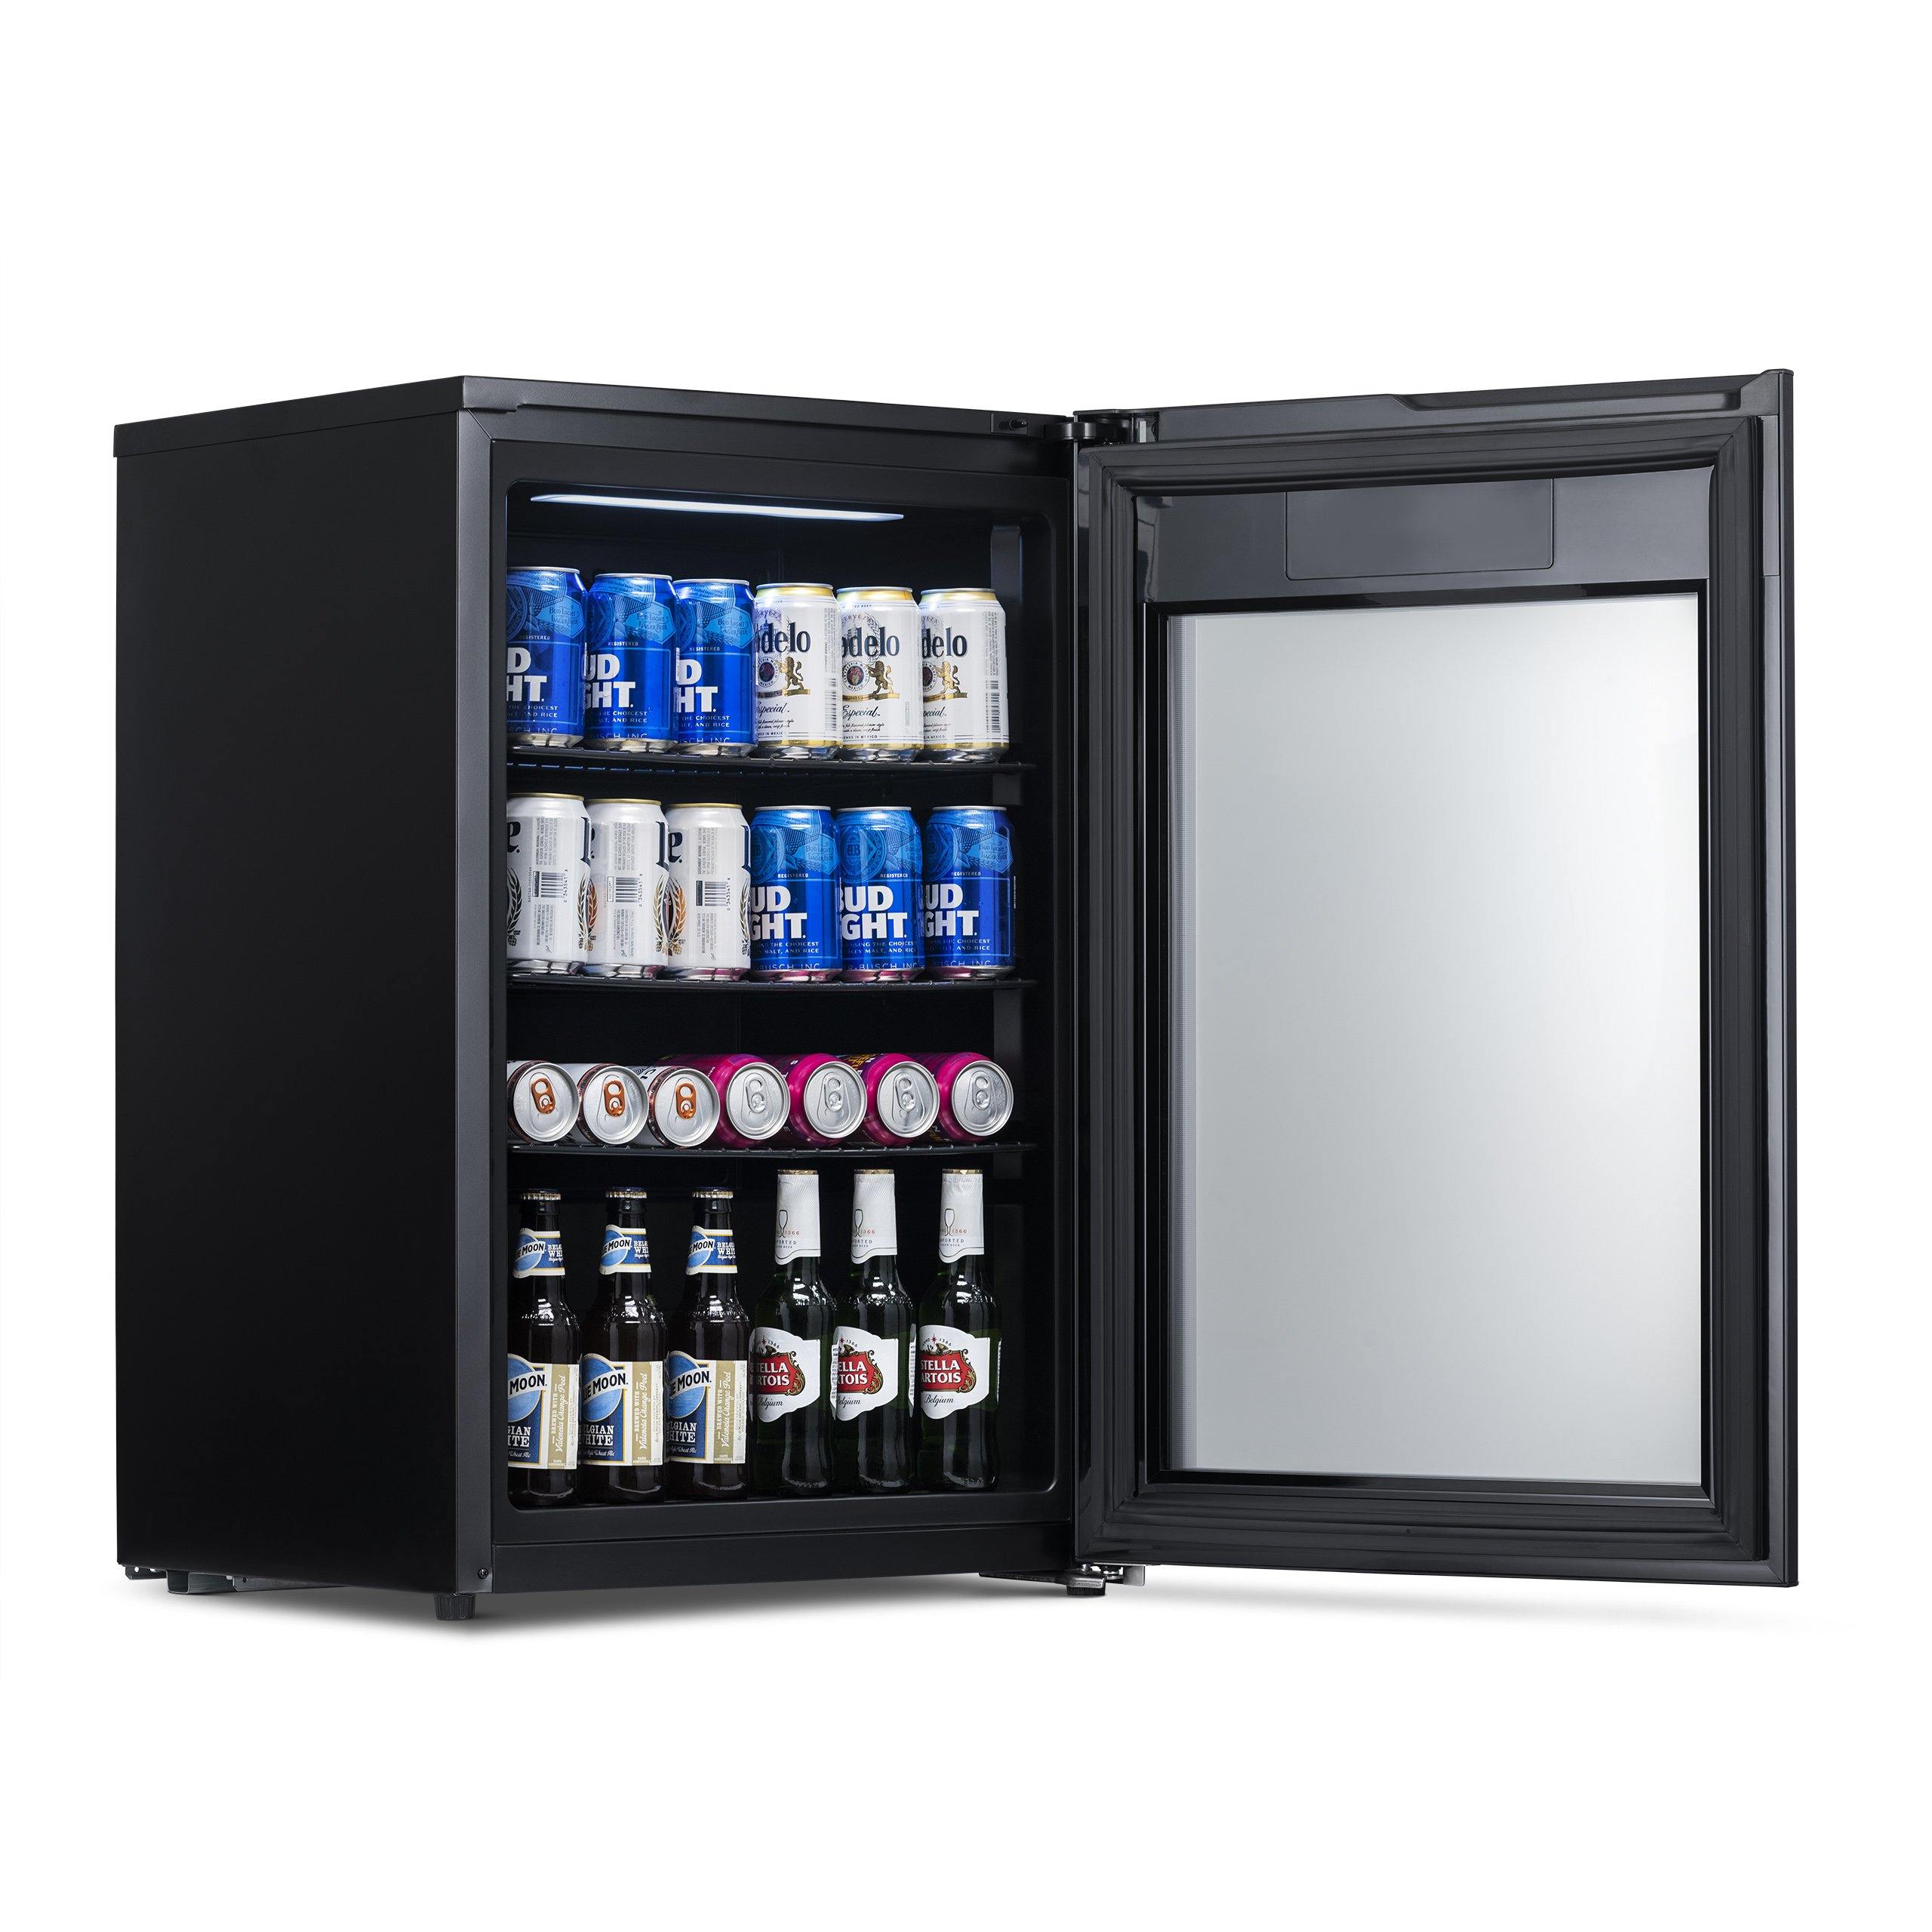 Newair Froster 125-Can Freestanding Black Beverage Center (NBF125BK00) - Chills Down to 23 Degrees!